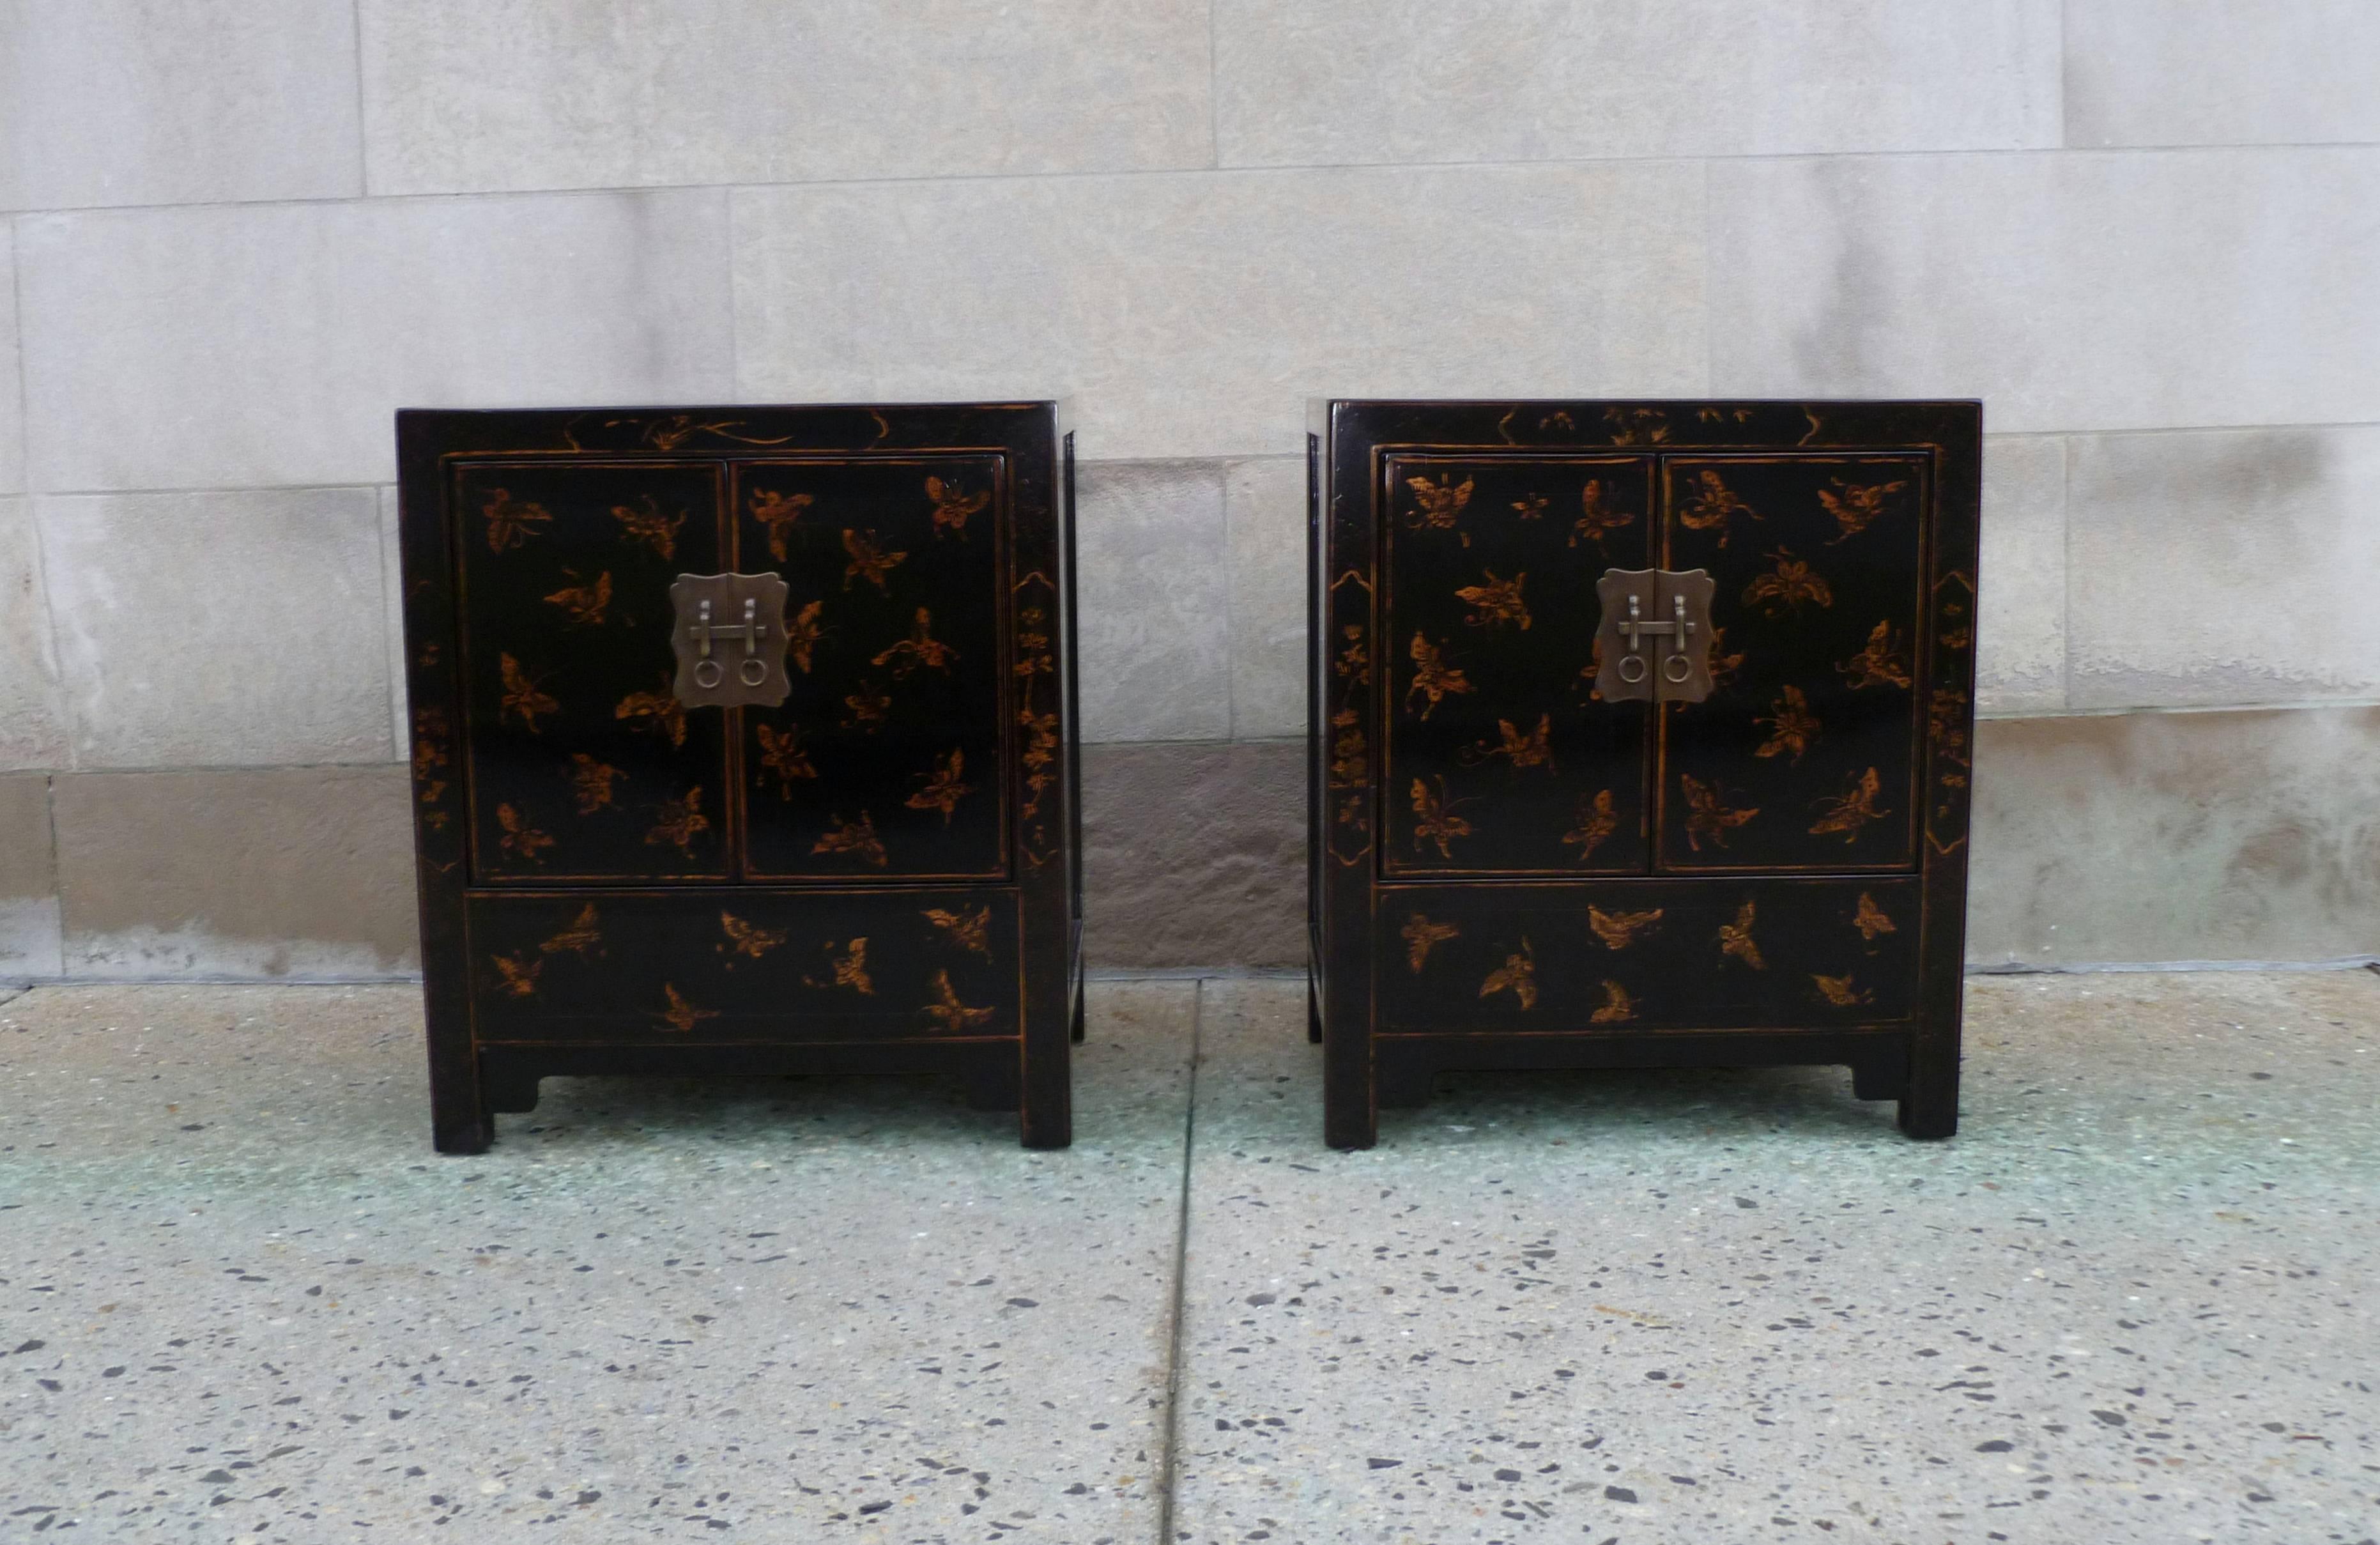 A pair of fine black lacquer chests with beautiful hand-painted butterfly motif in gold gilt.